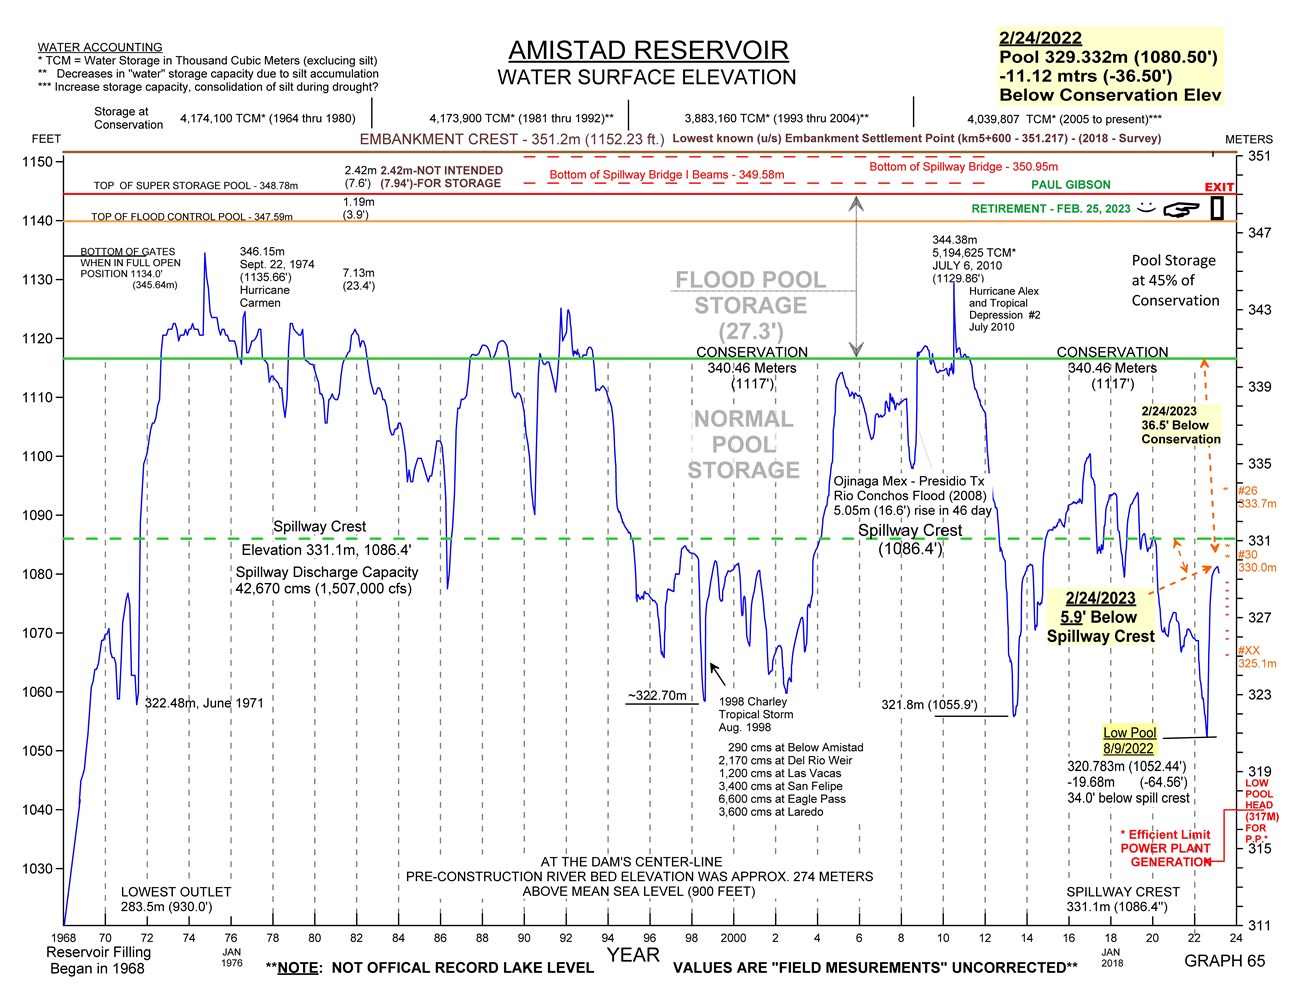 Chart showing fluctuations in reservoir levels from 1968 to February 2023. Details are in text below.